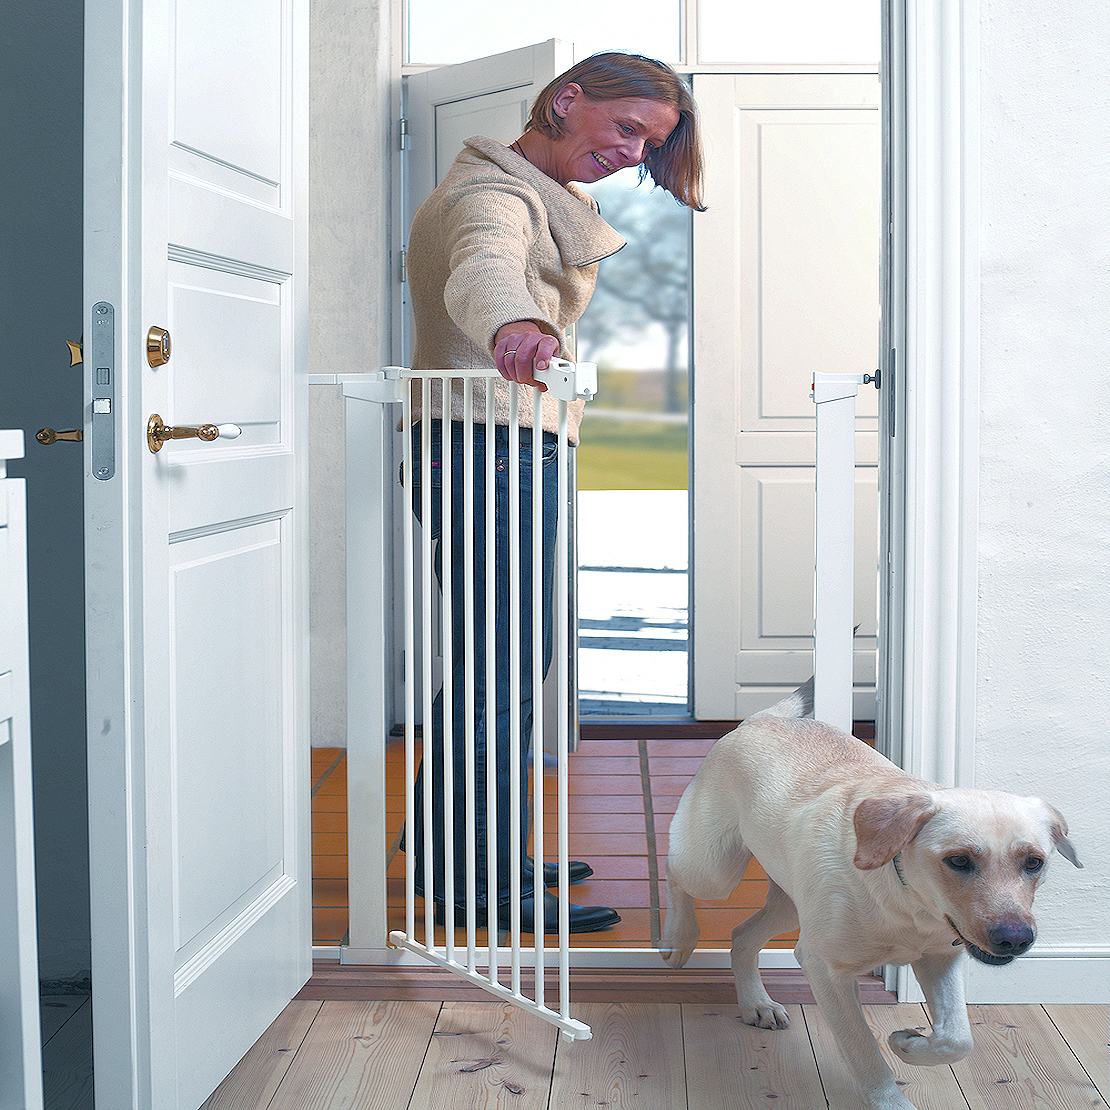 NEW BABYDAN PET OR BABY EXTRA TALL SAFETY STAIR GATE